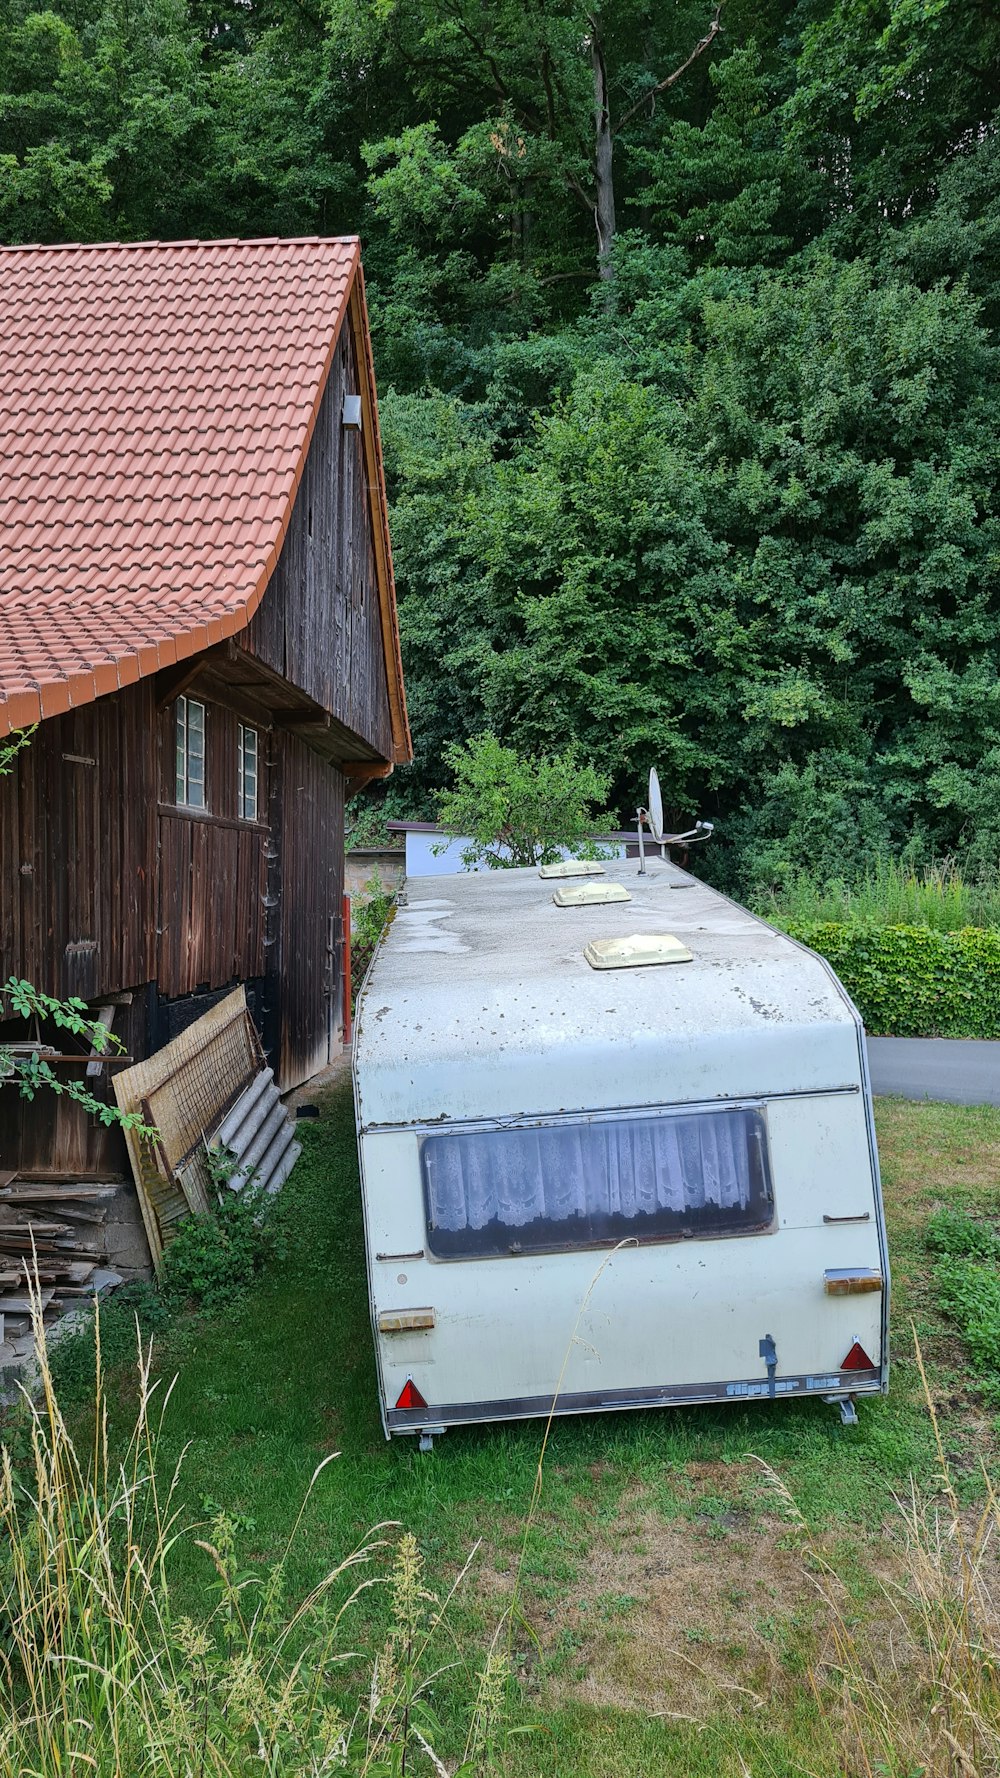 a trailer parked outside a house